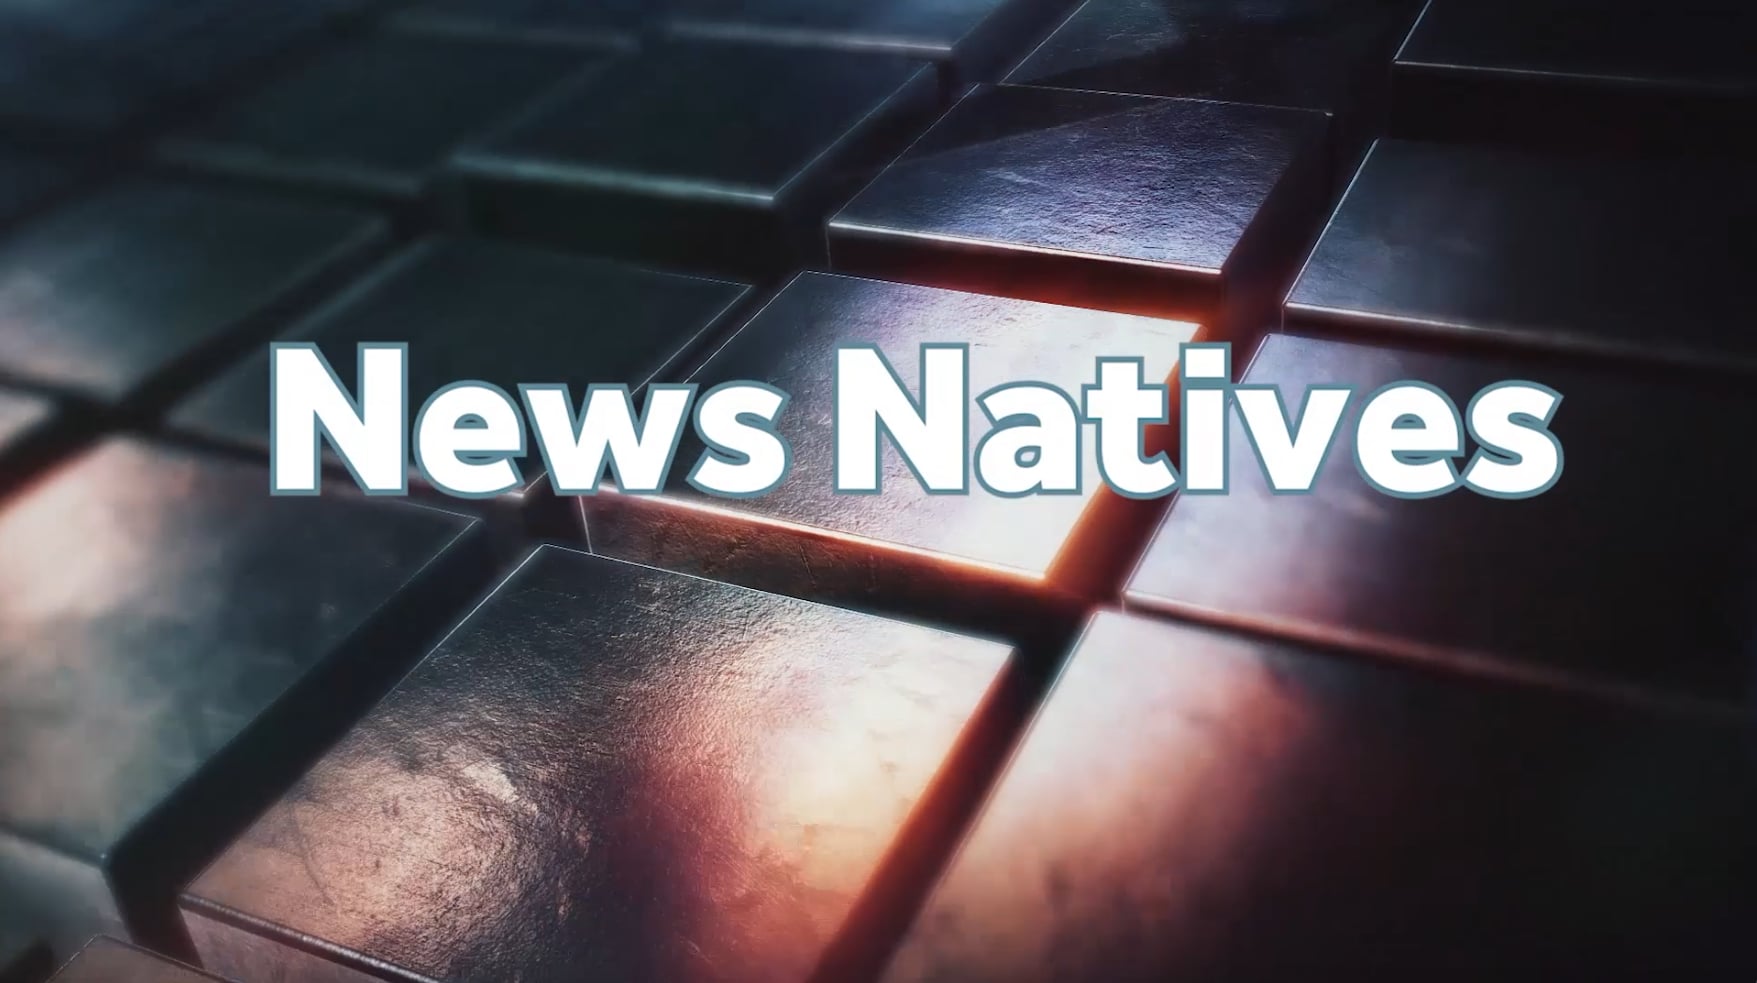 News Natives 5 – Topic: Cuts to University Departments